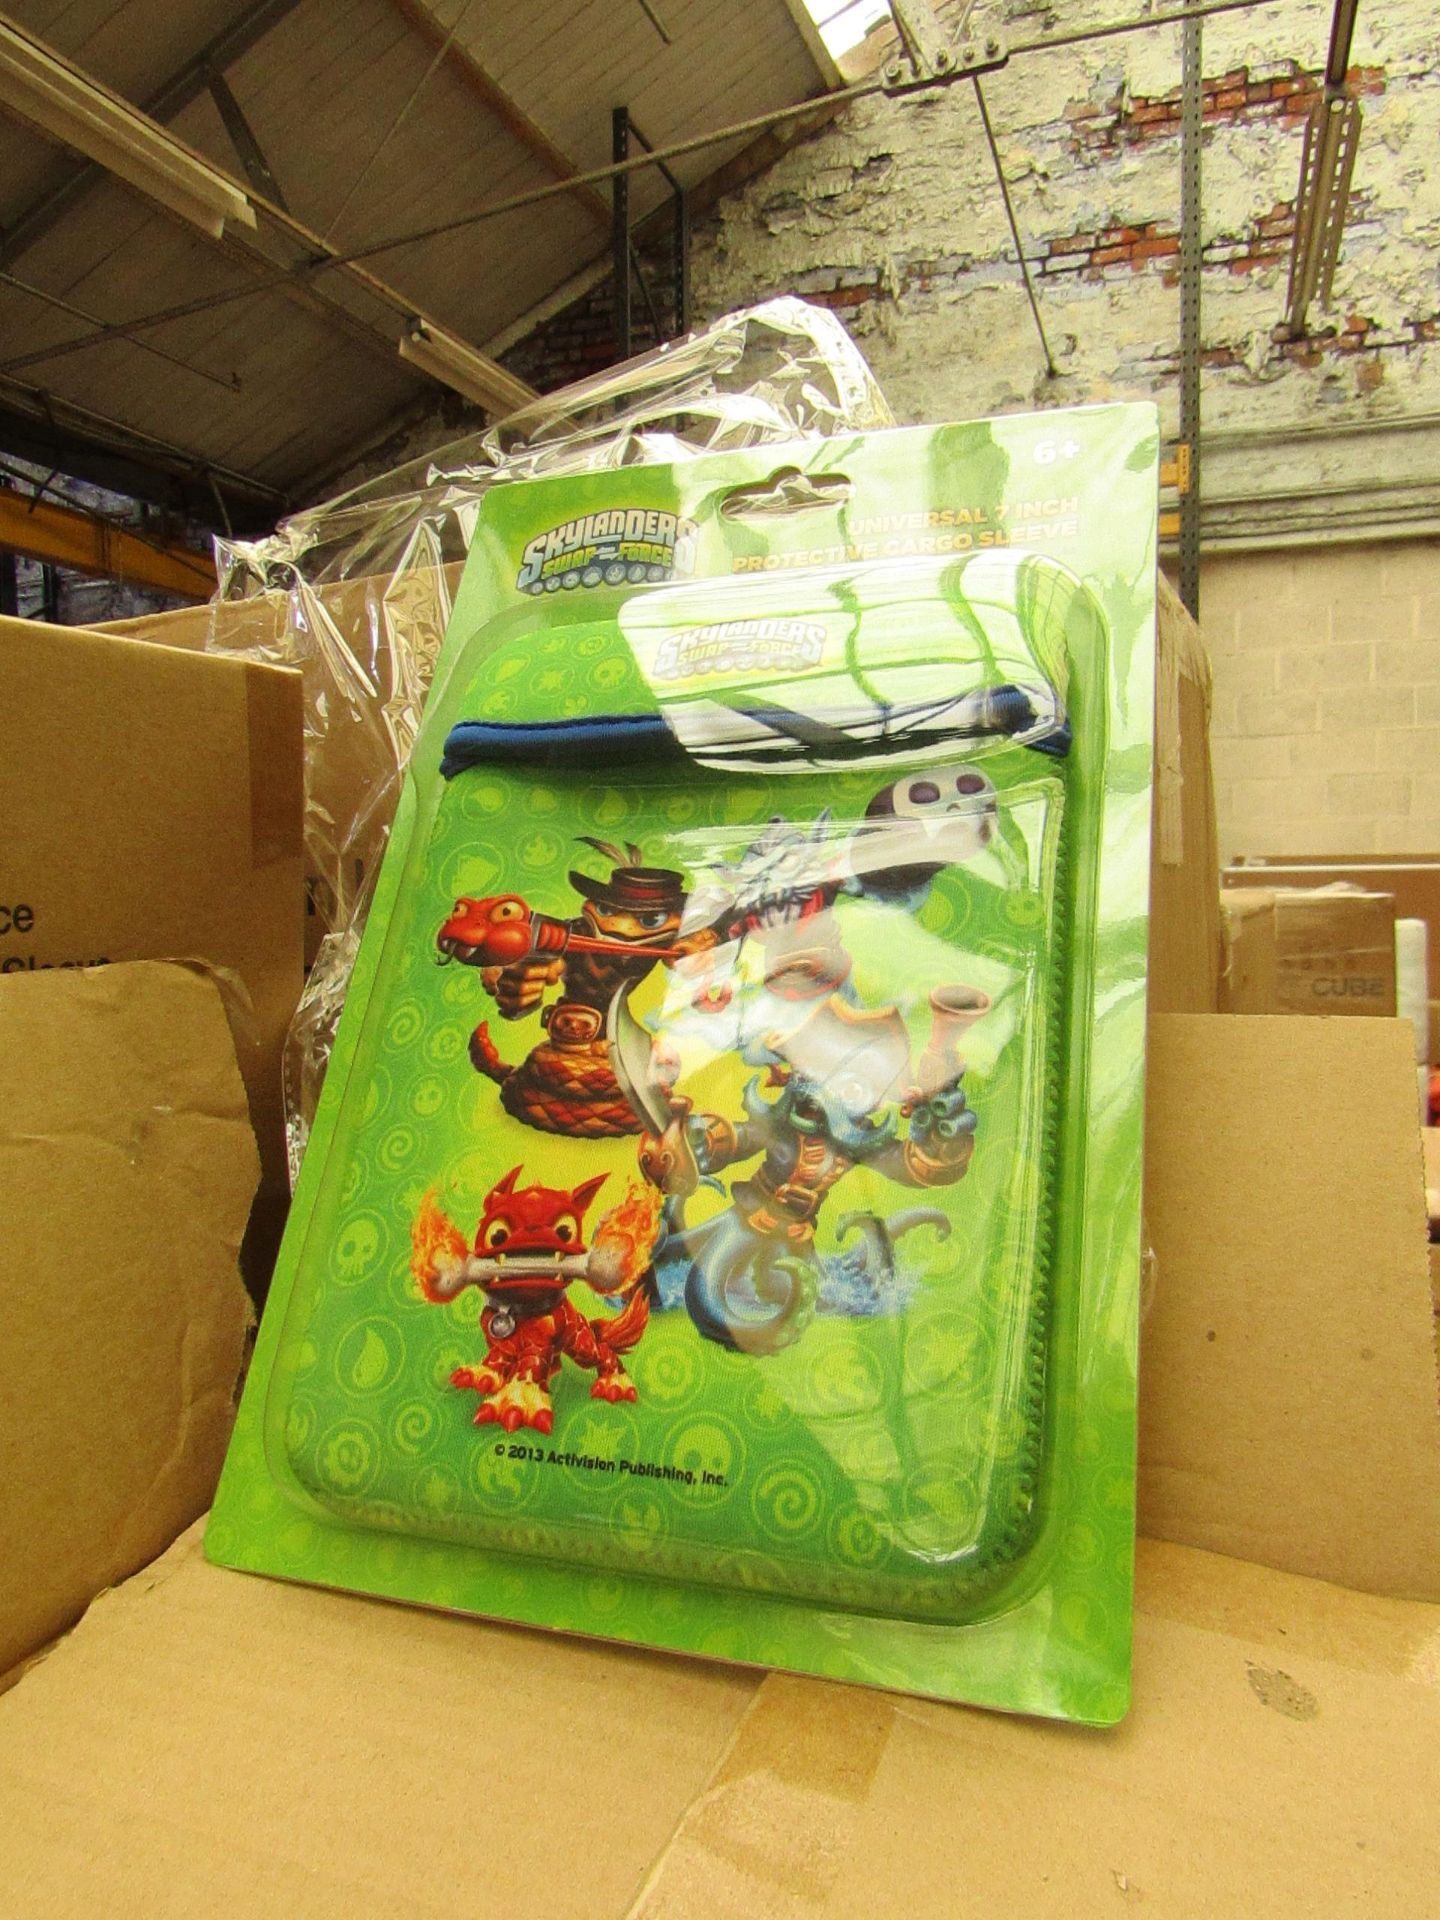 Box of 12 Skylander Universal Cargo Sleeves For 7" Tablets/Notebooks. New & Packaged